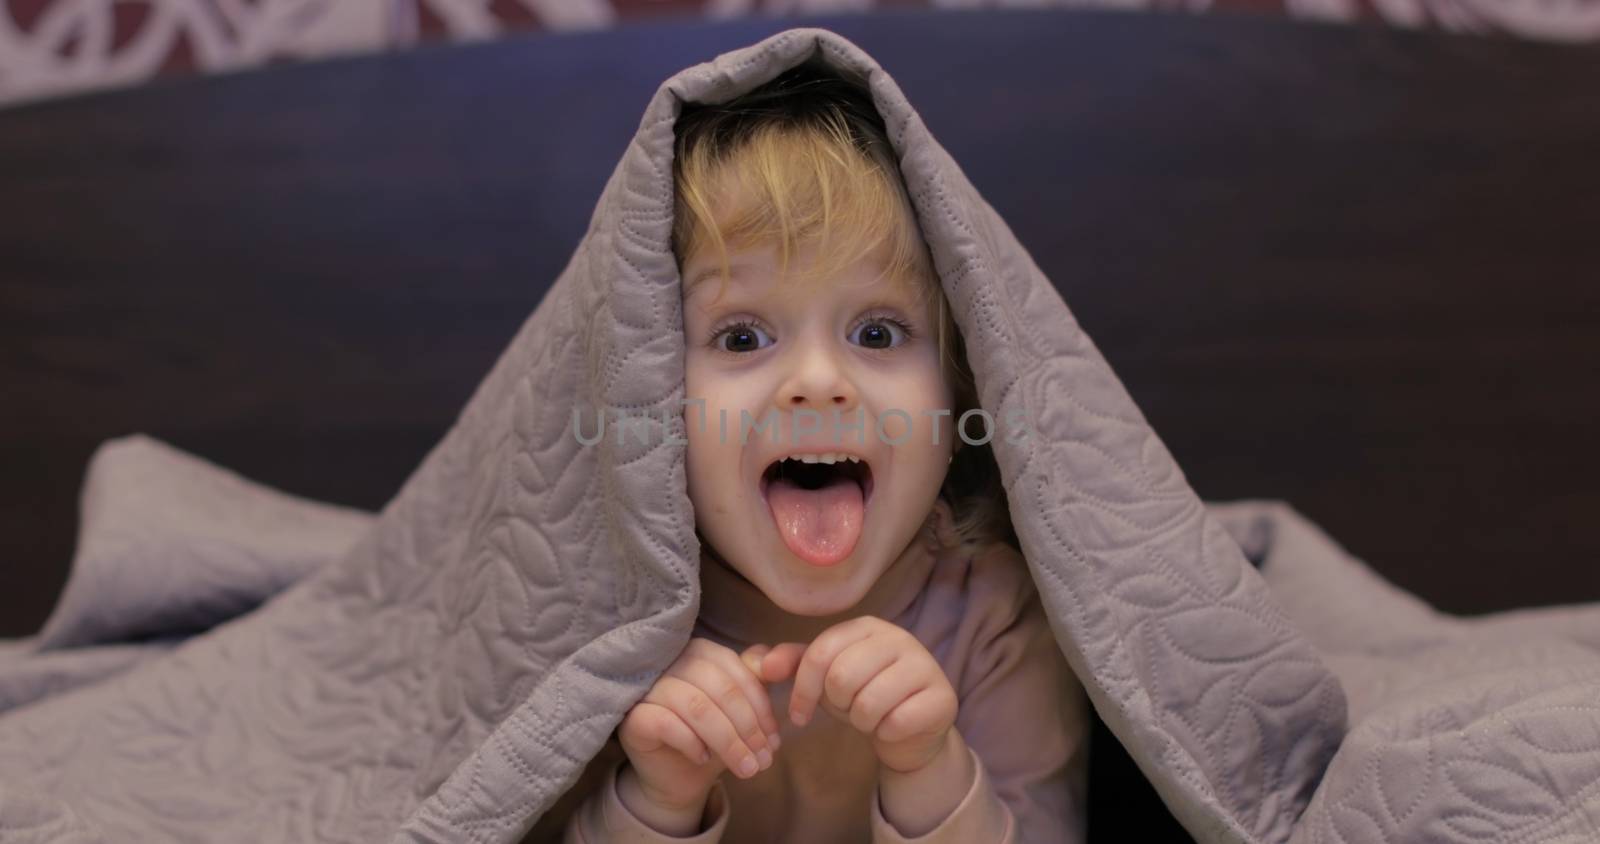 Little cheerful girl hides under a blanket and watching TV. Sweet, adorable child having fun on the bed under a coverlet. Concept of kids sleep, care or childhood